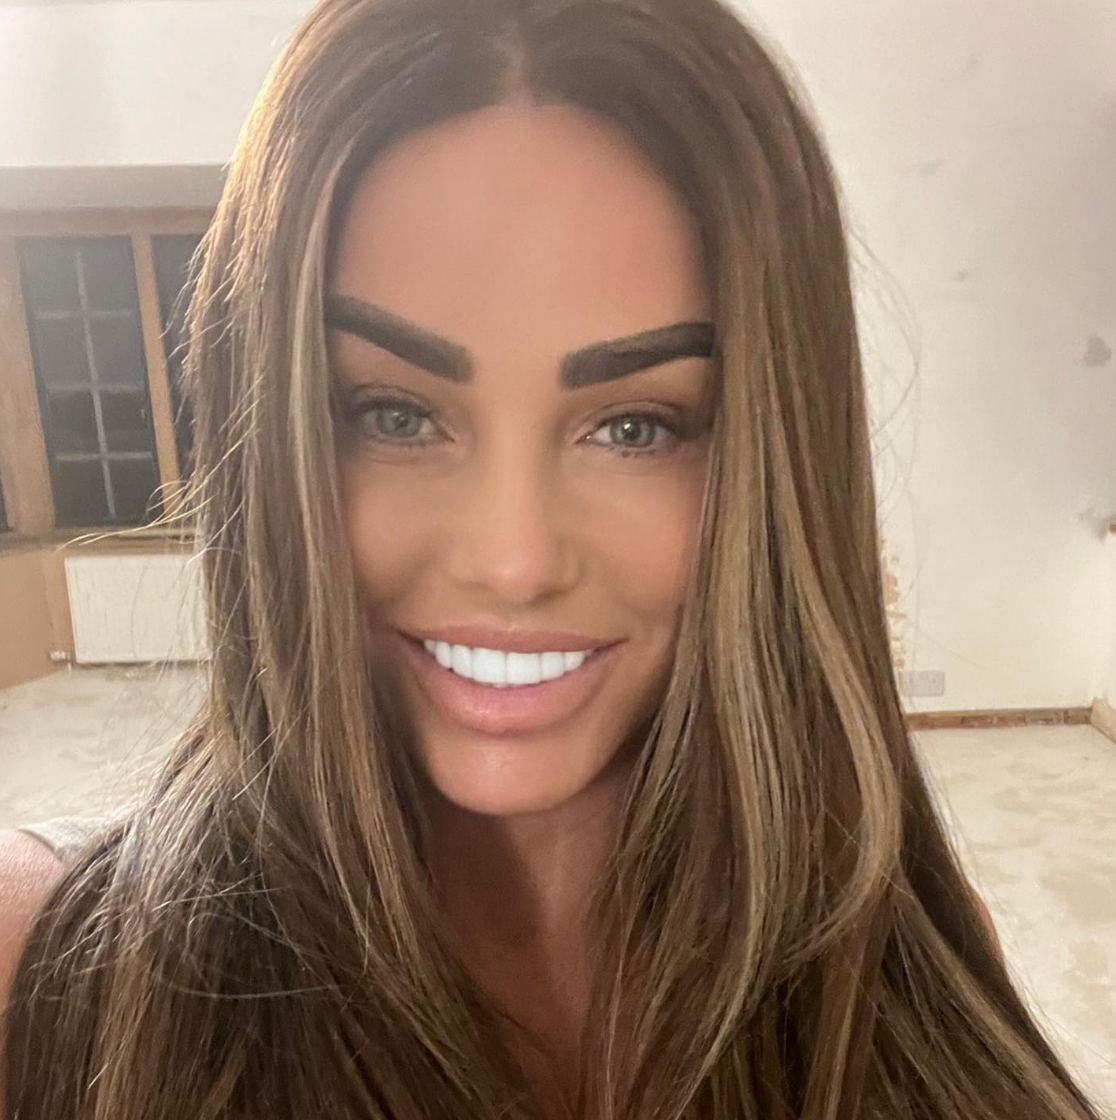 Katie Price reprises extensions and skimpy underwear for DIY photoshoot